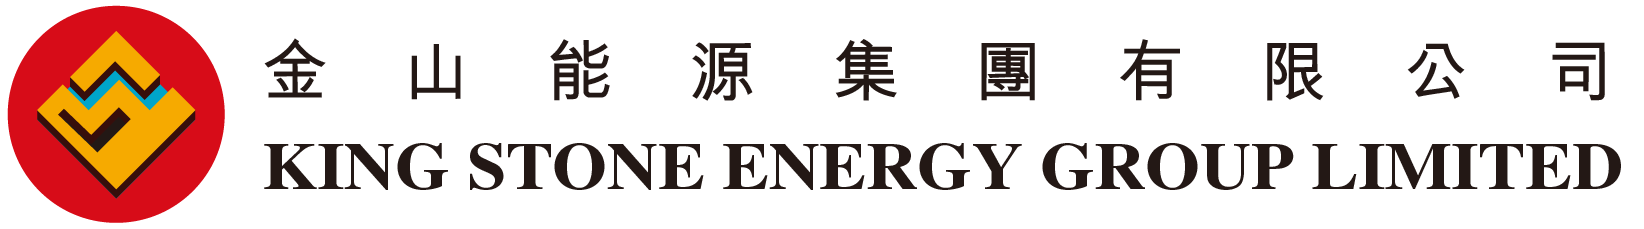 King Stone Energy Group Limited